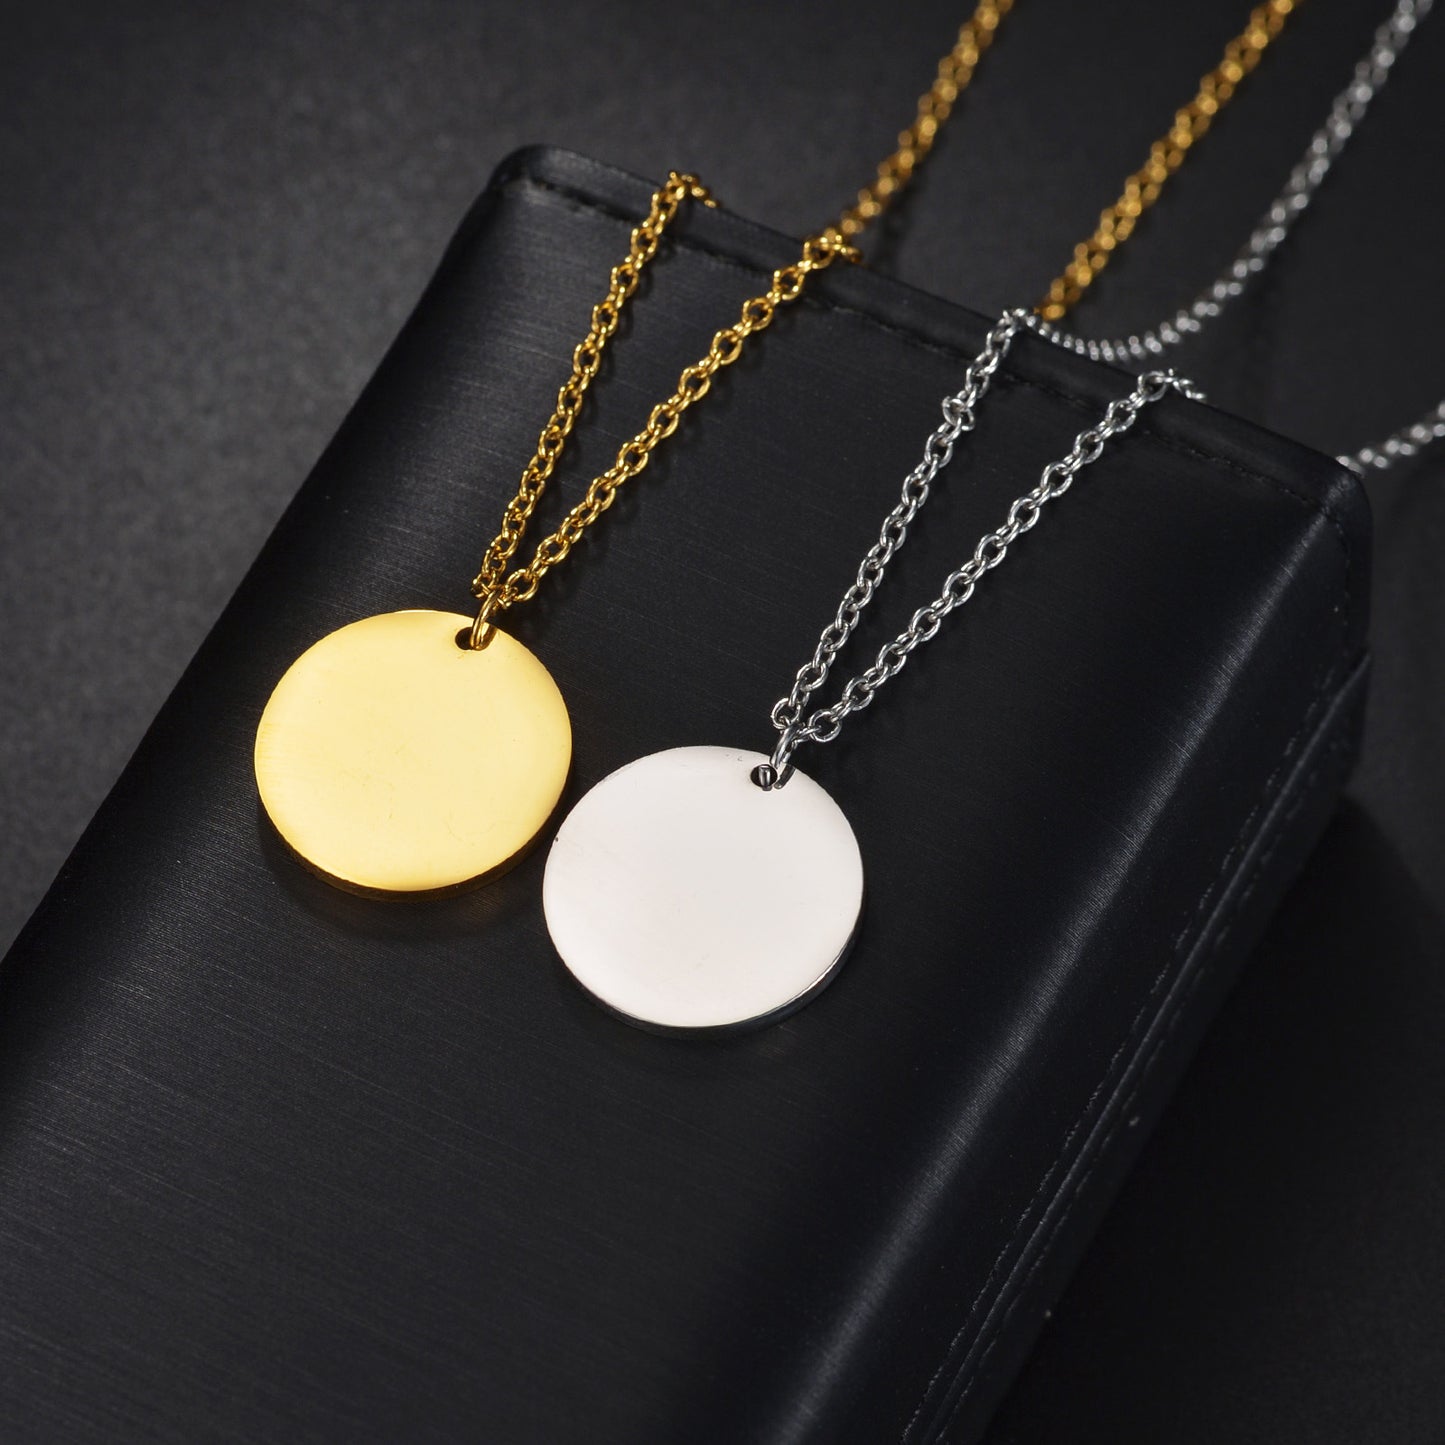 Stylish & Simple necklace for woman